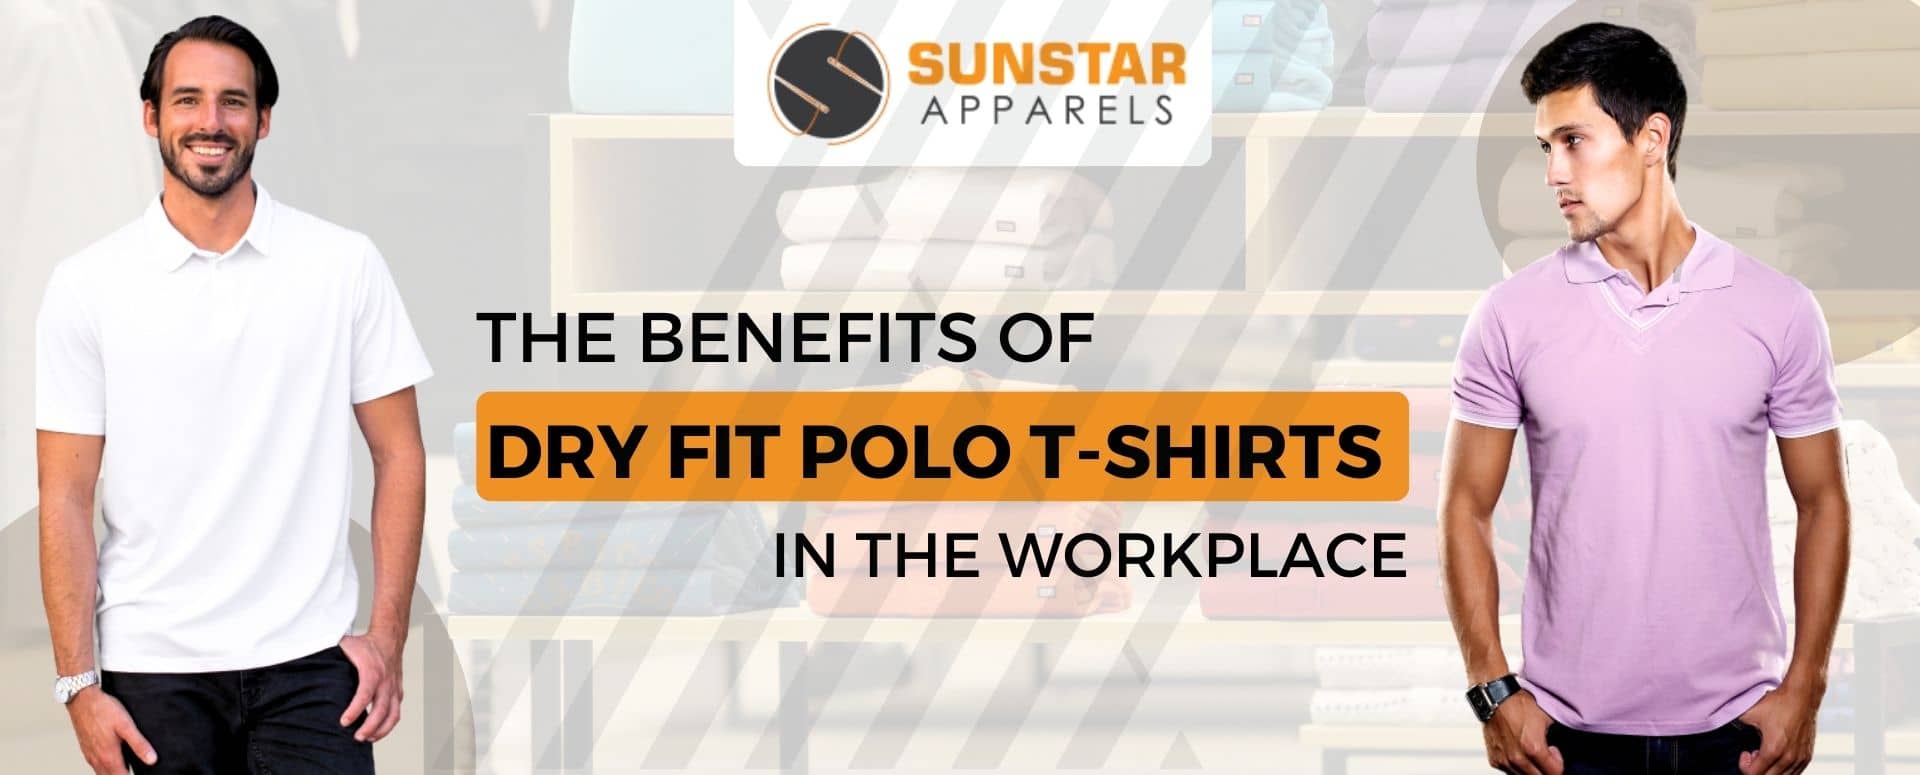 The Benefits of Dry Fit Polo T-Shirts in the Workplace